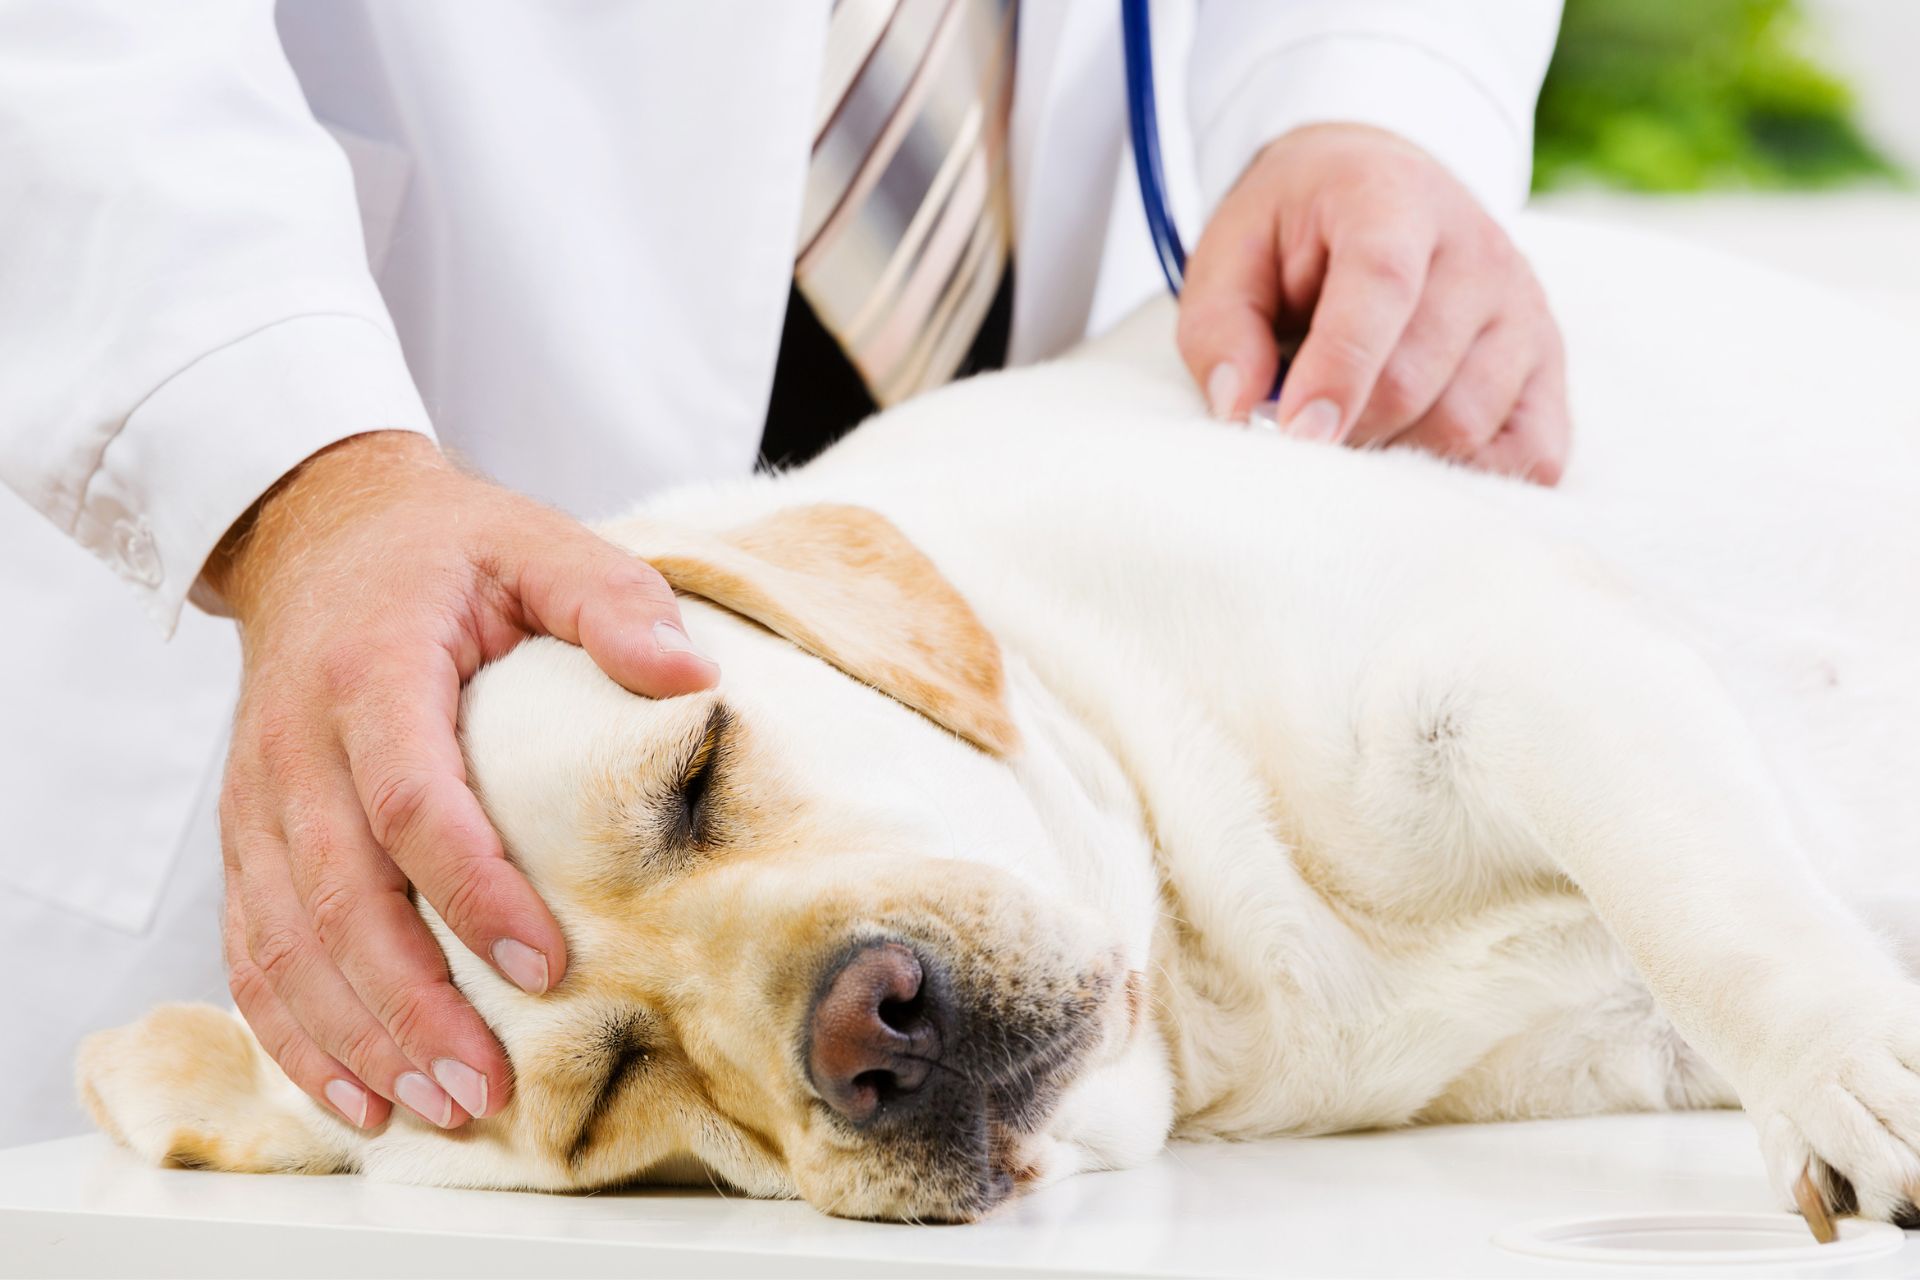 a dog lying on a table being examined with a stethoscope